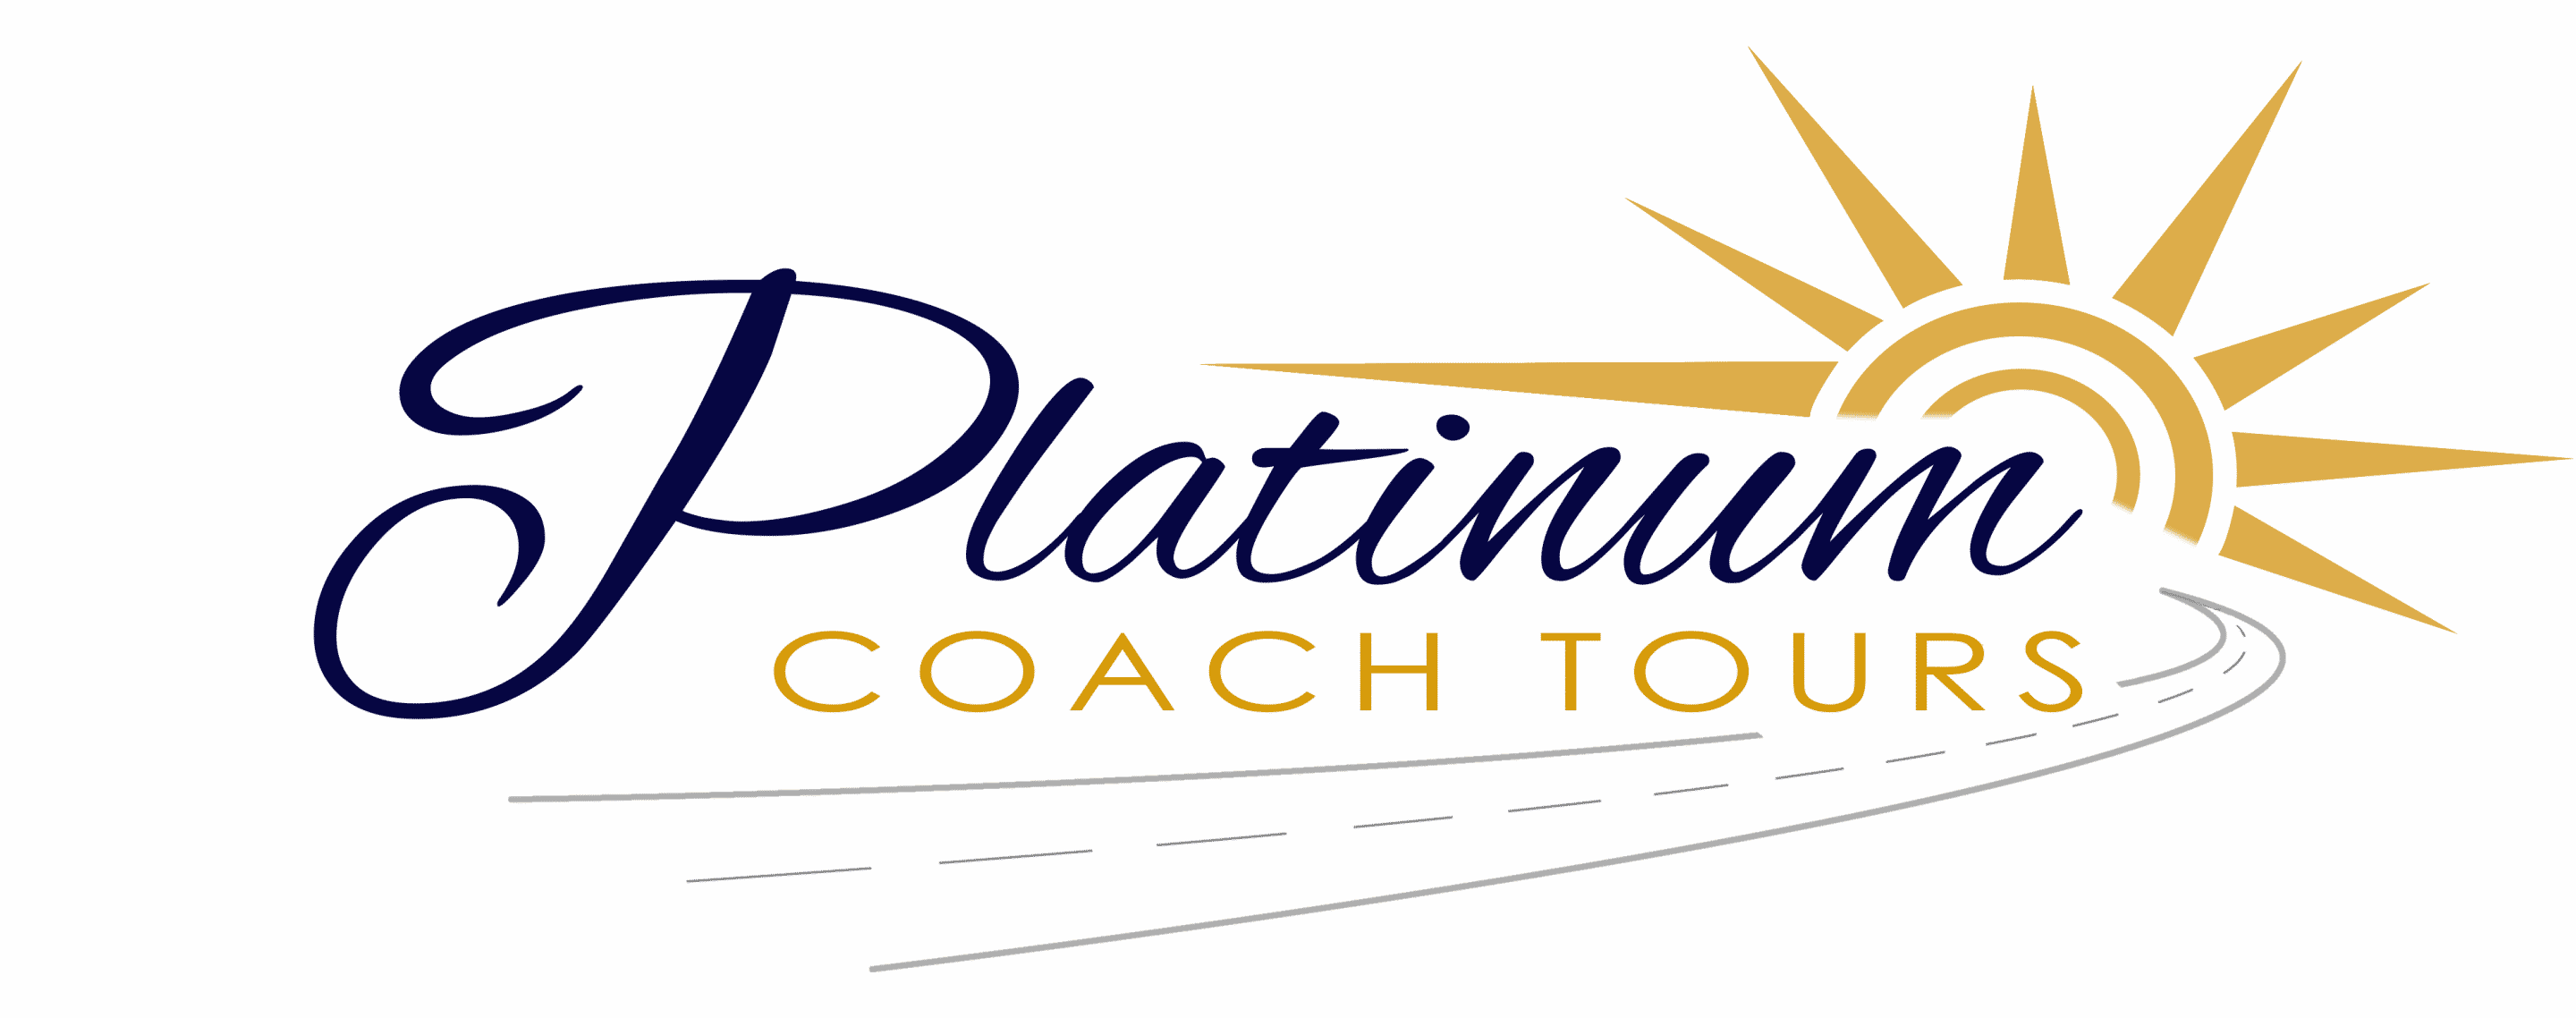 coach tour holidays in uk